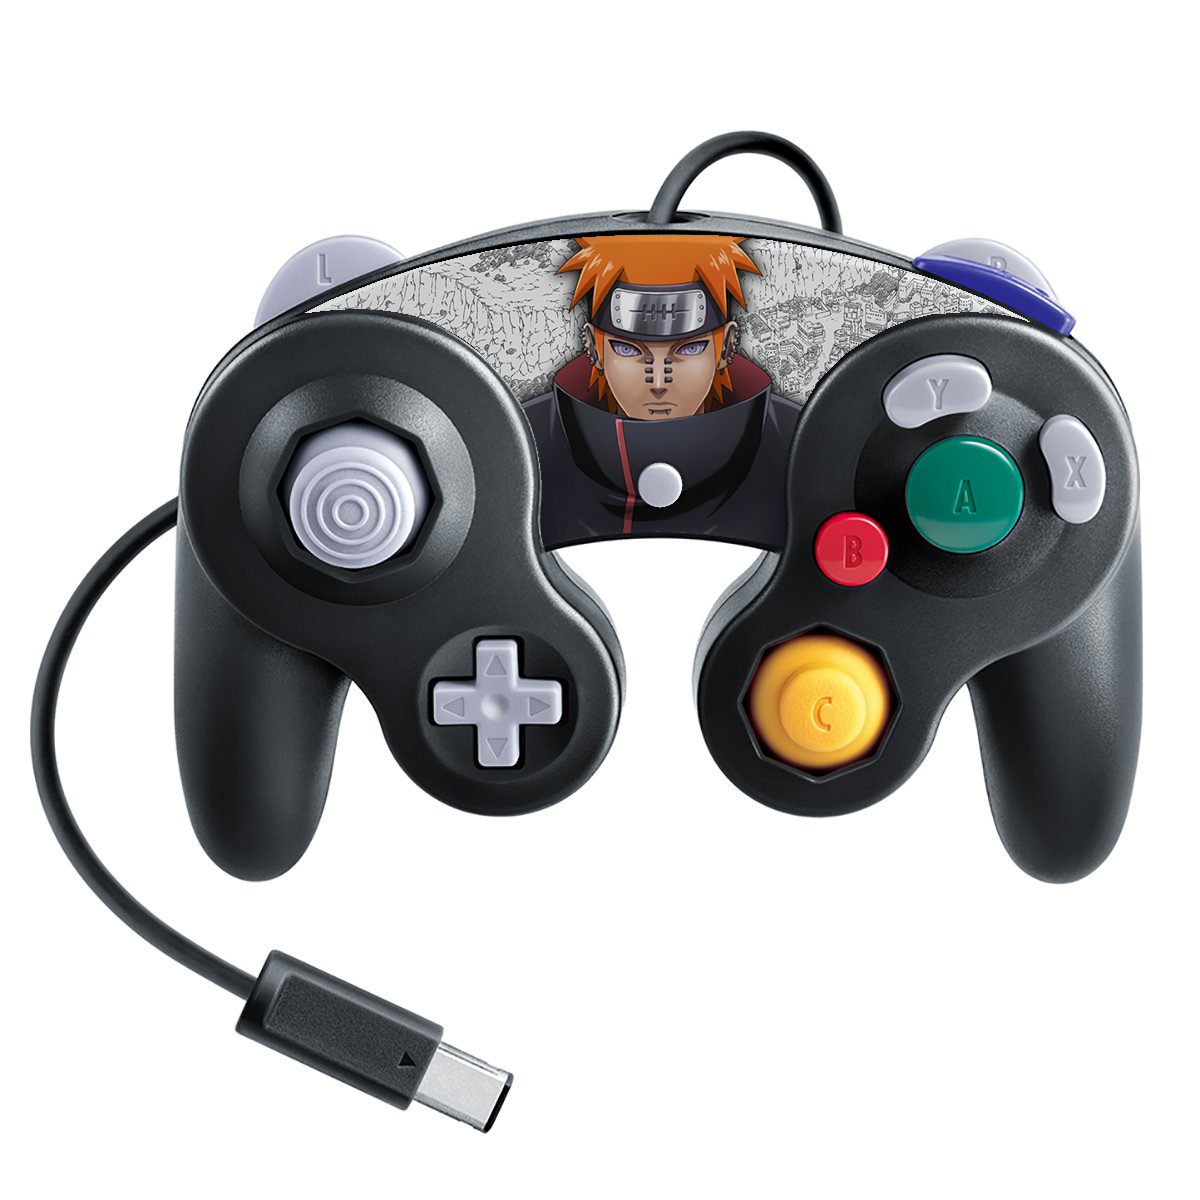 Pain (Naruto) Gamecube Controller Skin Top Only Skins